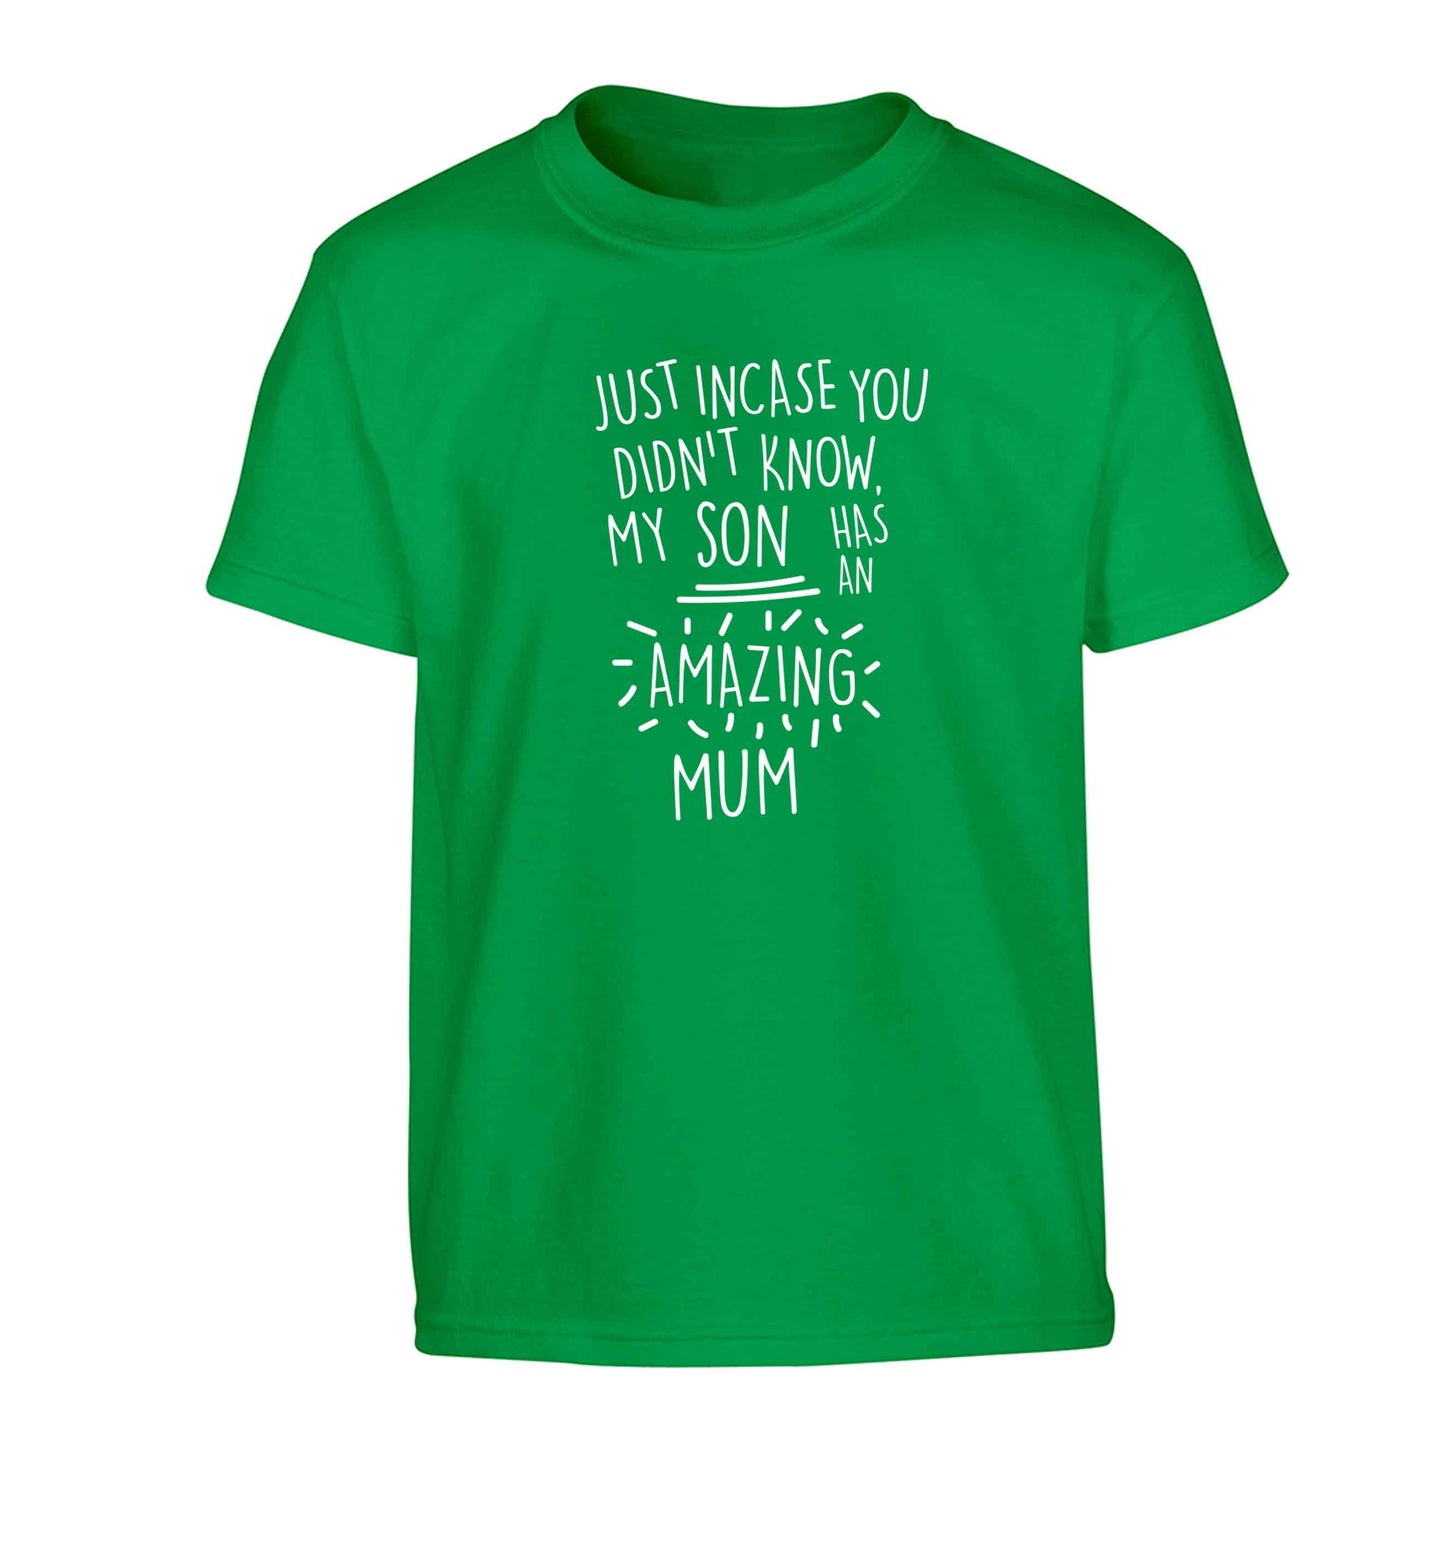 Just incase you didn't know my son has an amazing mum Children's green Tshirt 12-13 Years